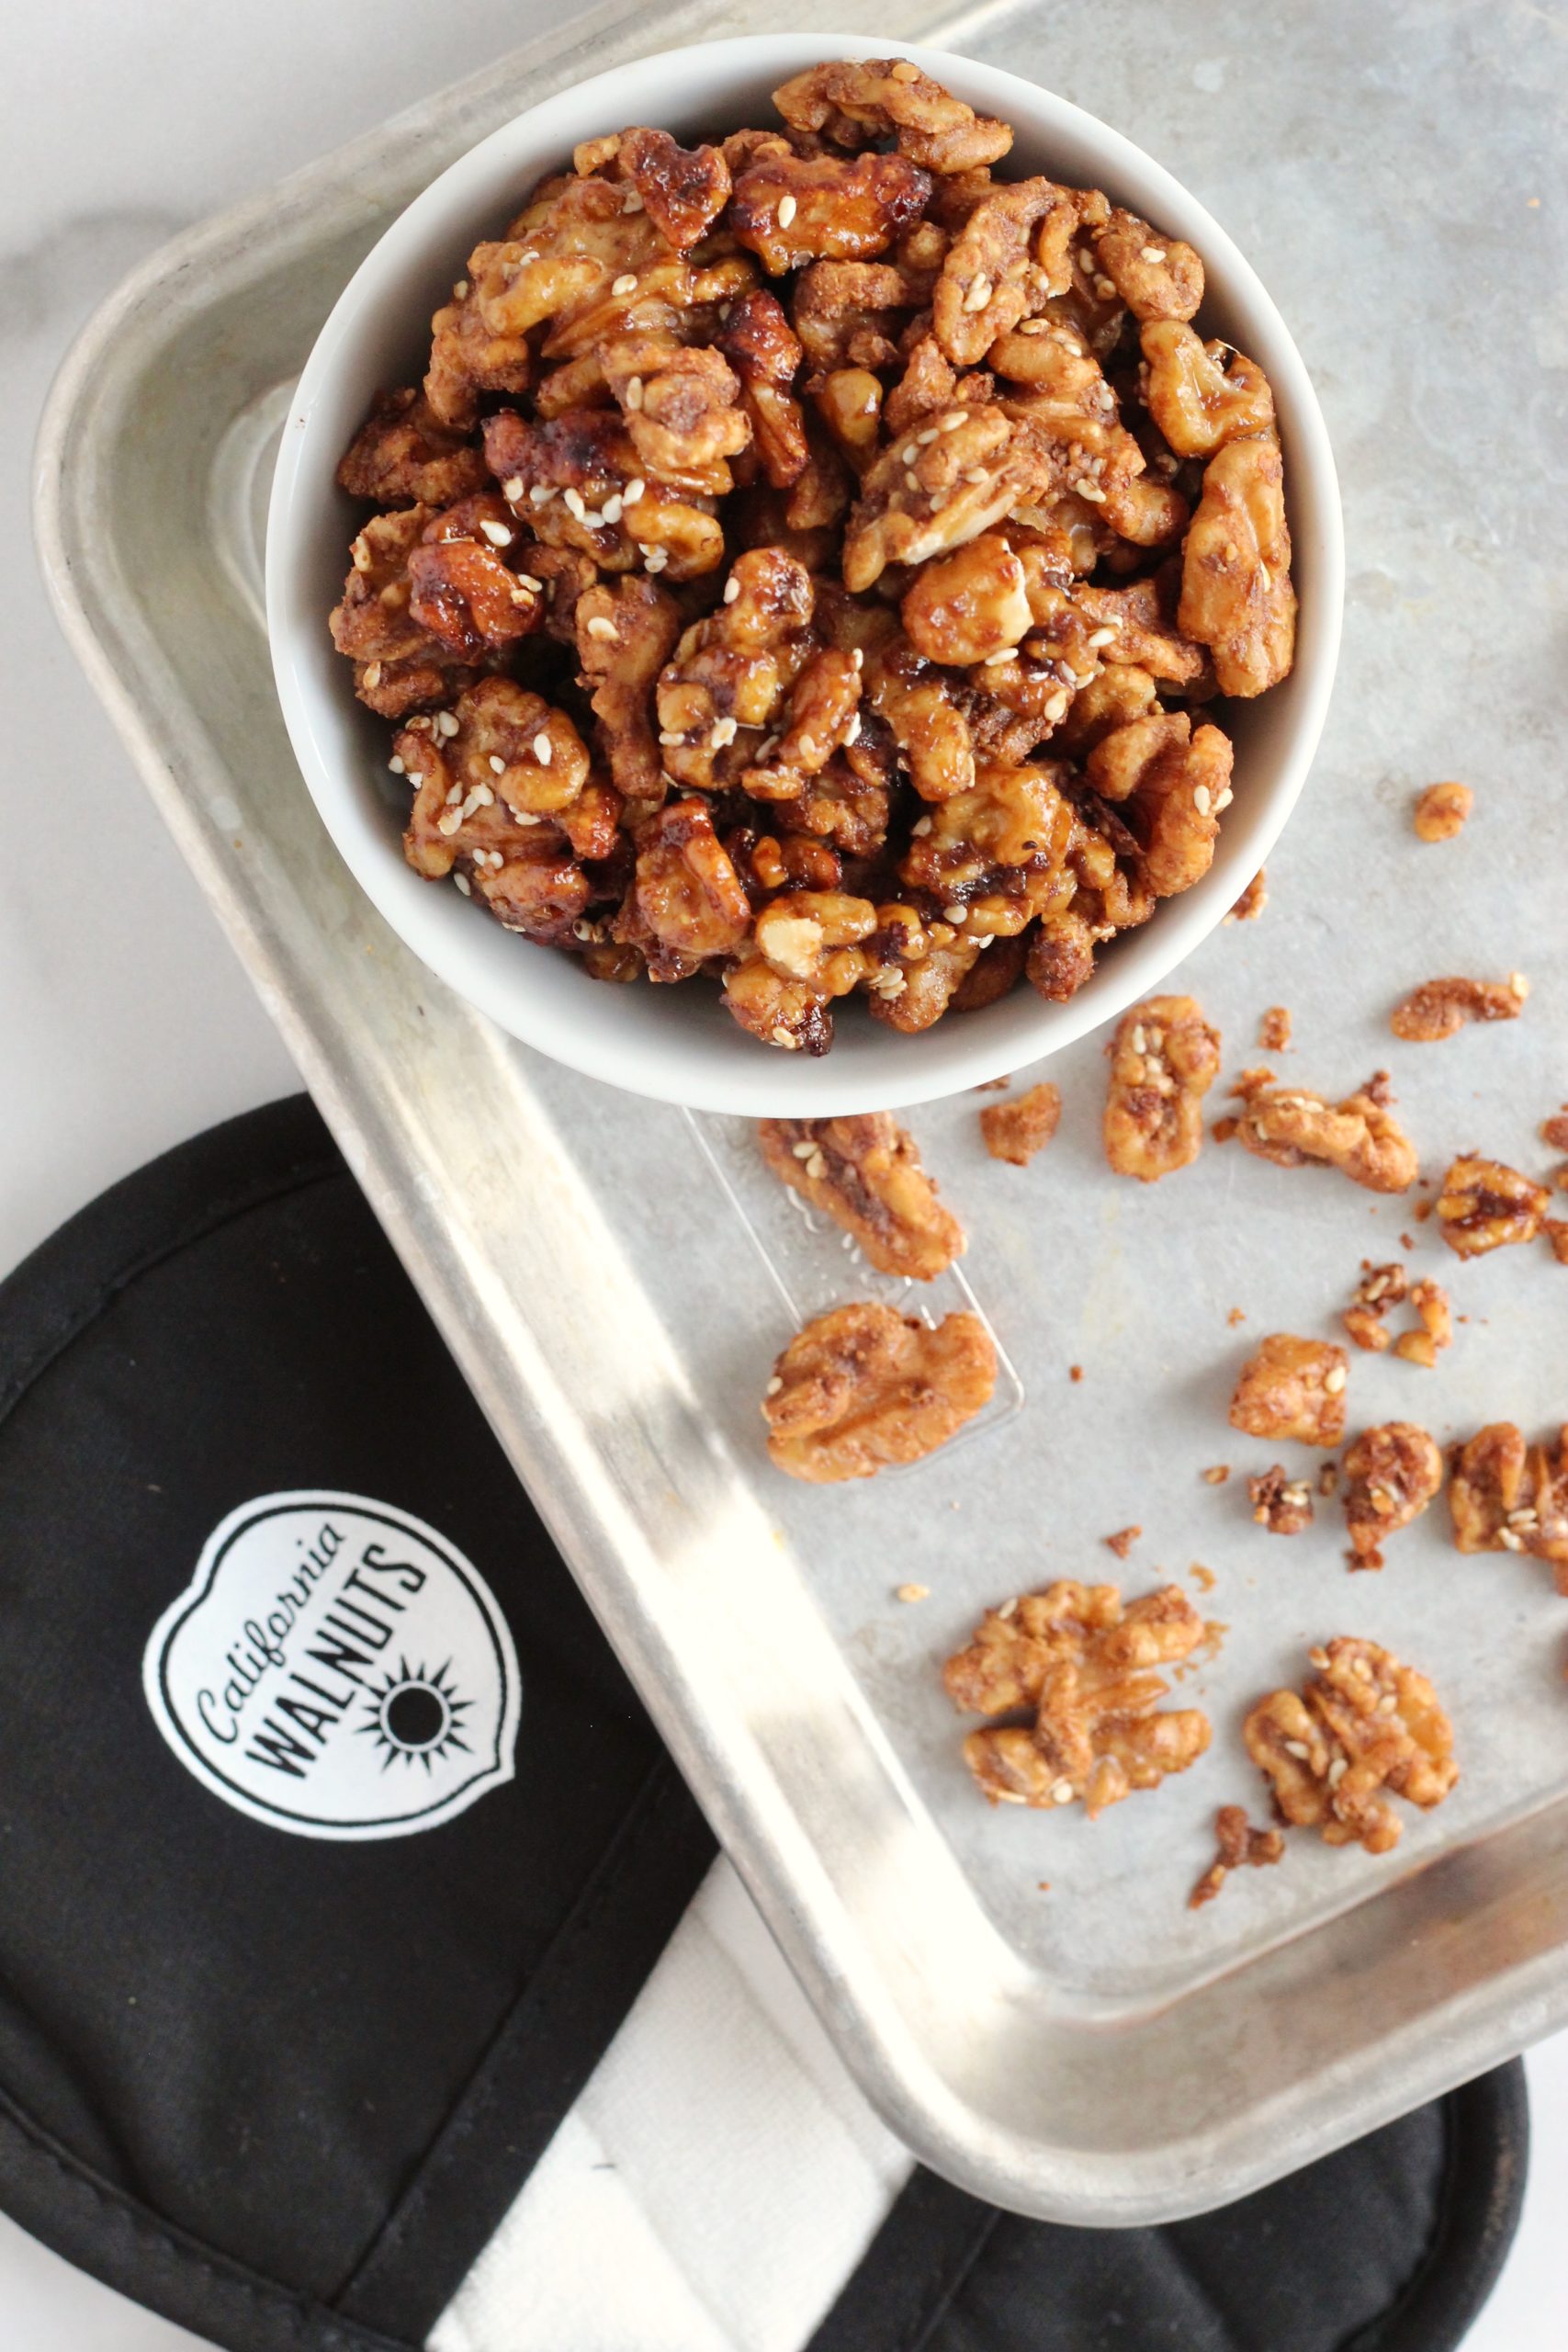 These crunchy soy glazed walnuts are the perfect savory bite to snack on at home. They are seriously so easy to make and call for just a few simple pantry ingredients and spices. Recipe includes vegan and gluten-free friendly options. #PantryRecipe #Sponsored #WalnutsSweetOrSavory @CaWalnuts